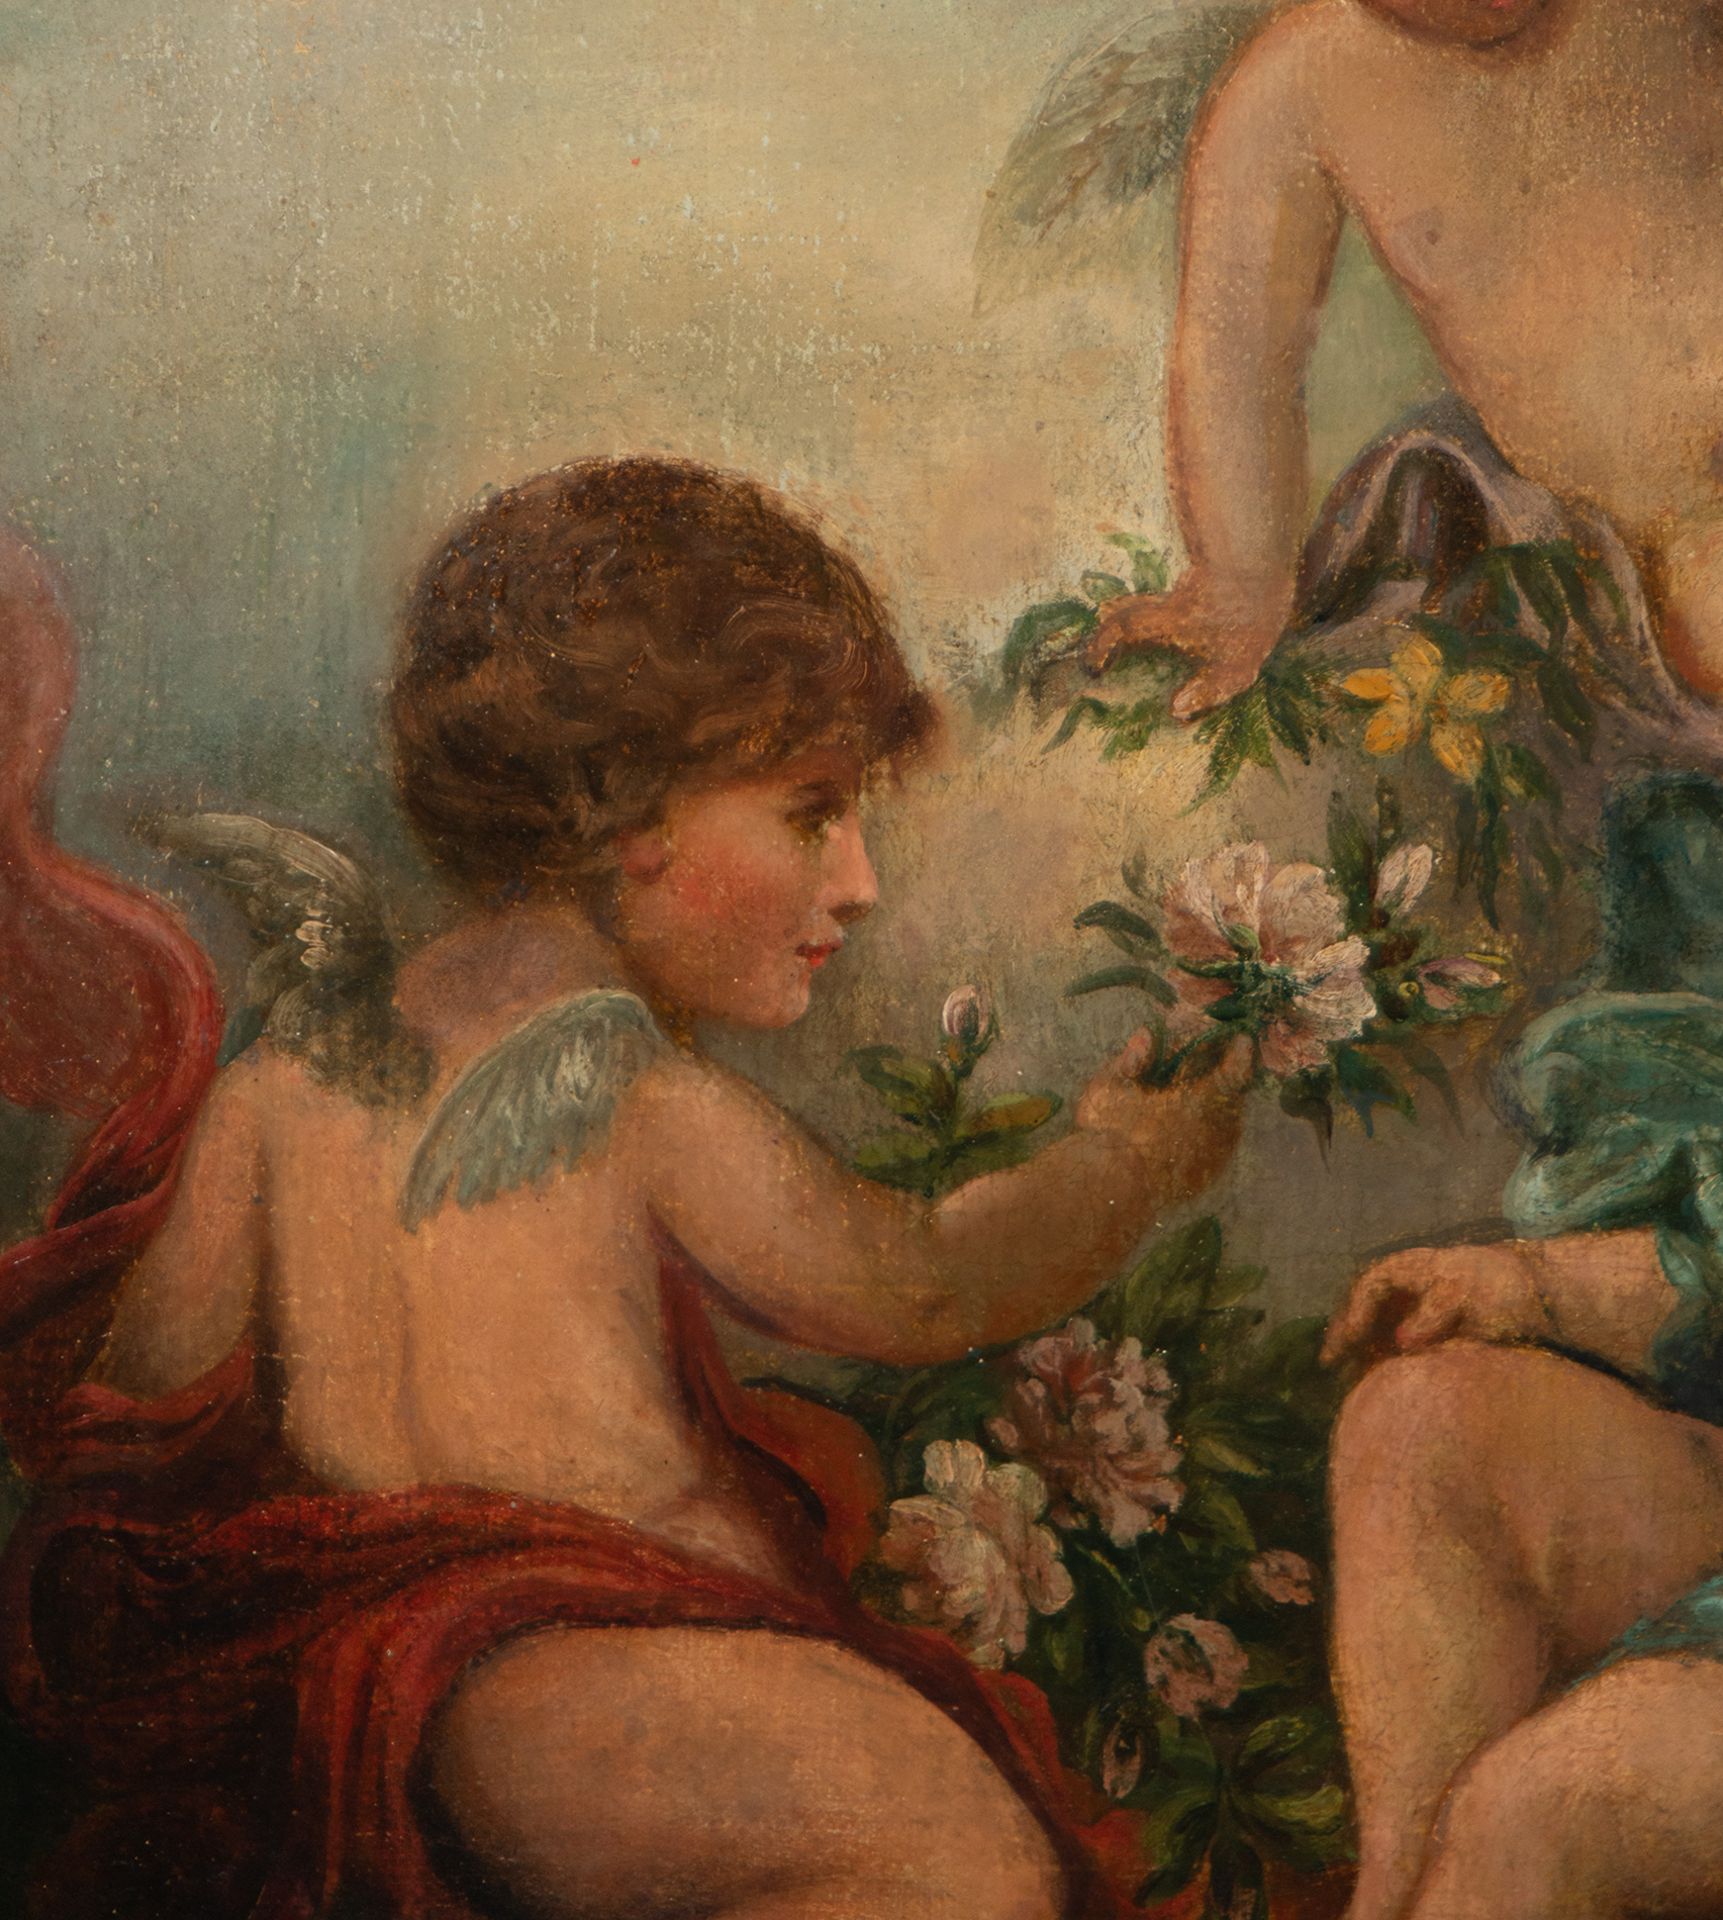 Five Cupids in Garden with Flowers, 19th century English romanticist school - Image 3 of 6